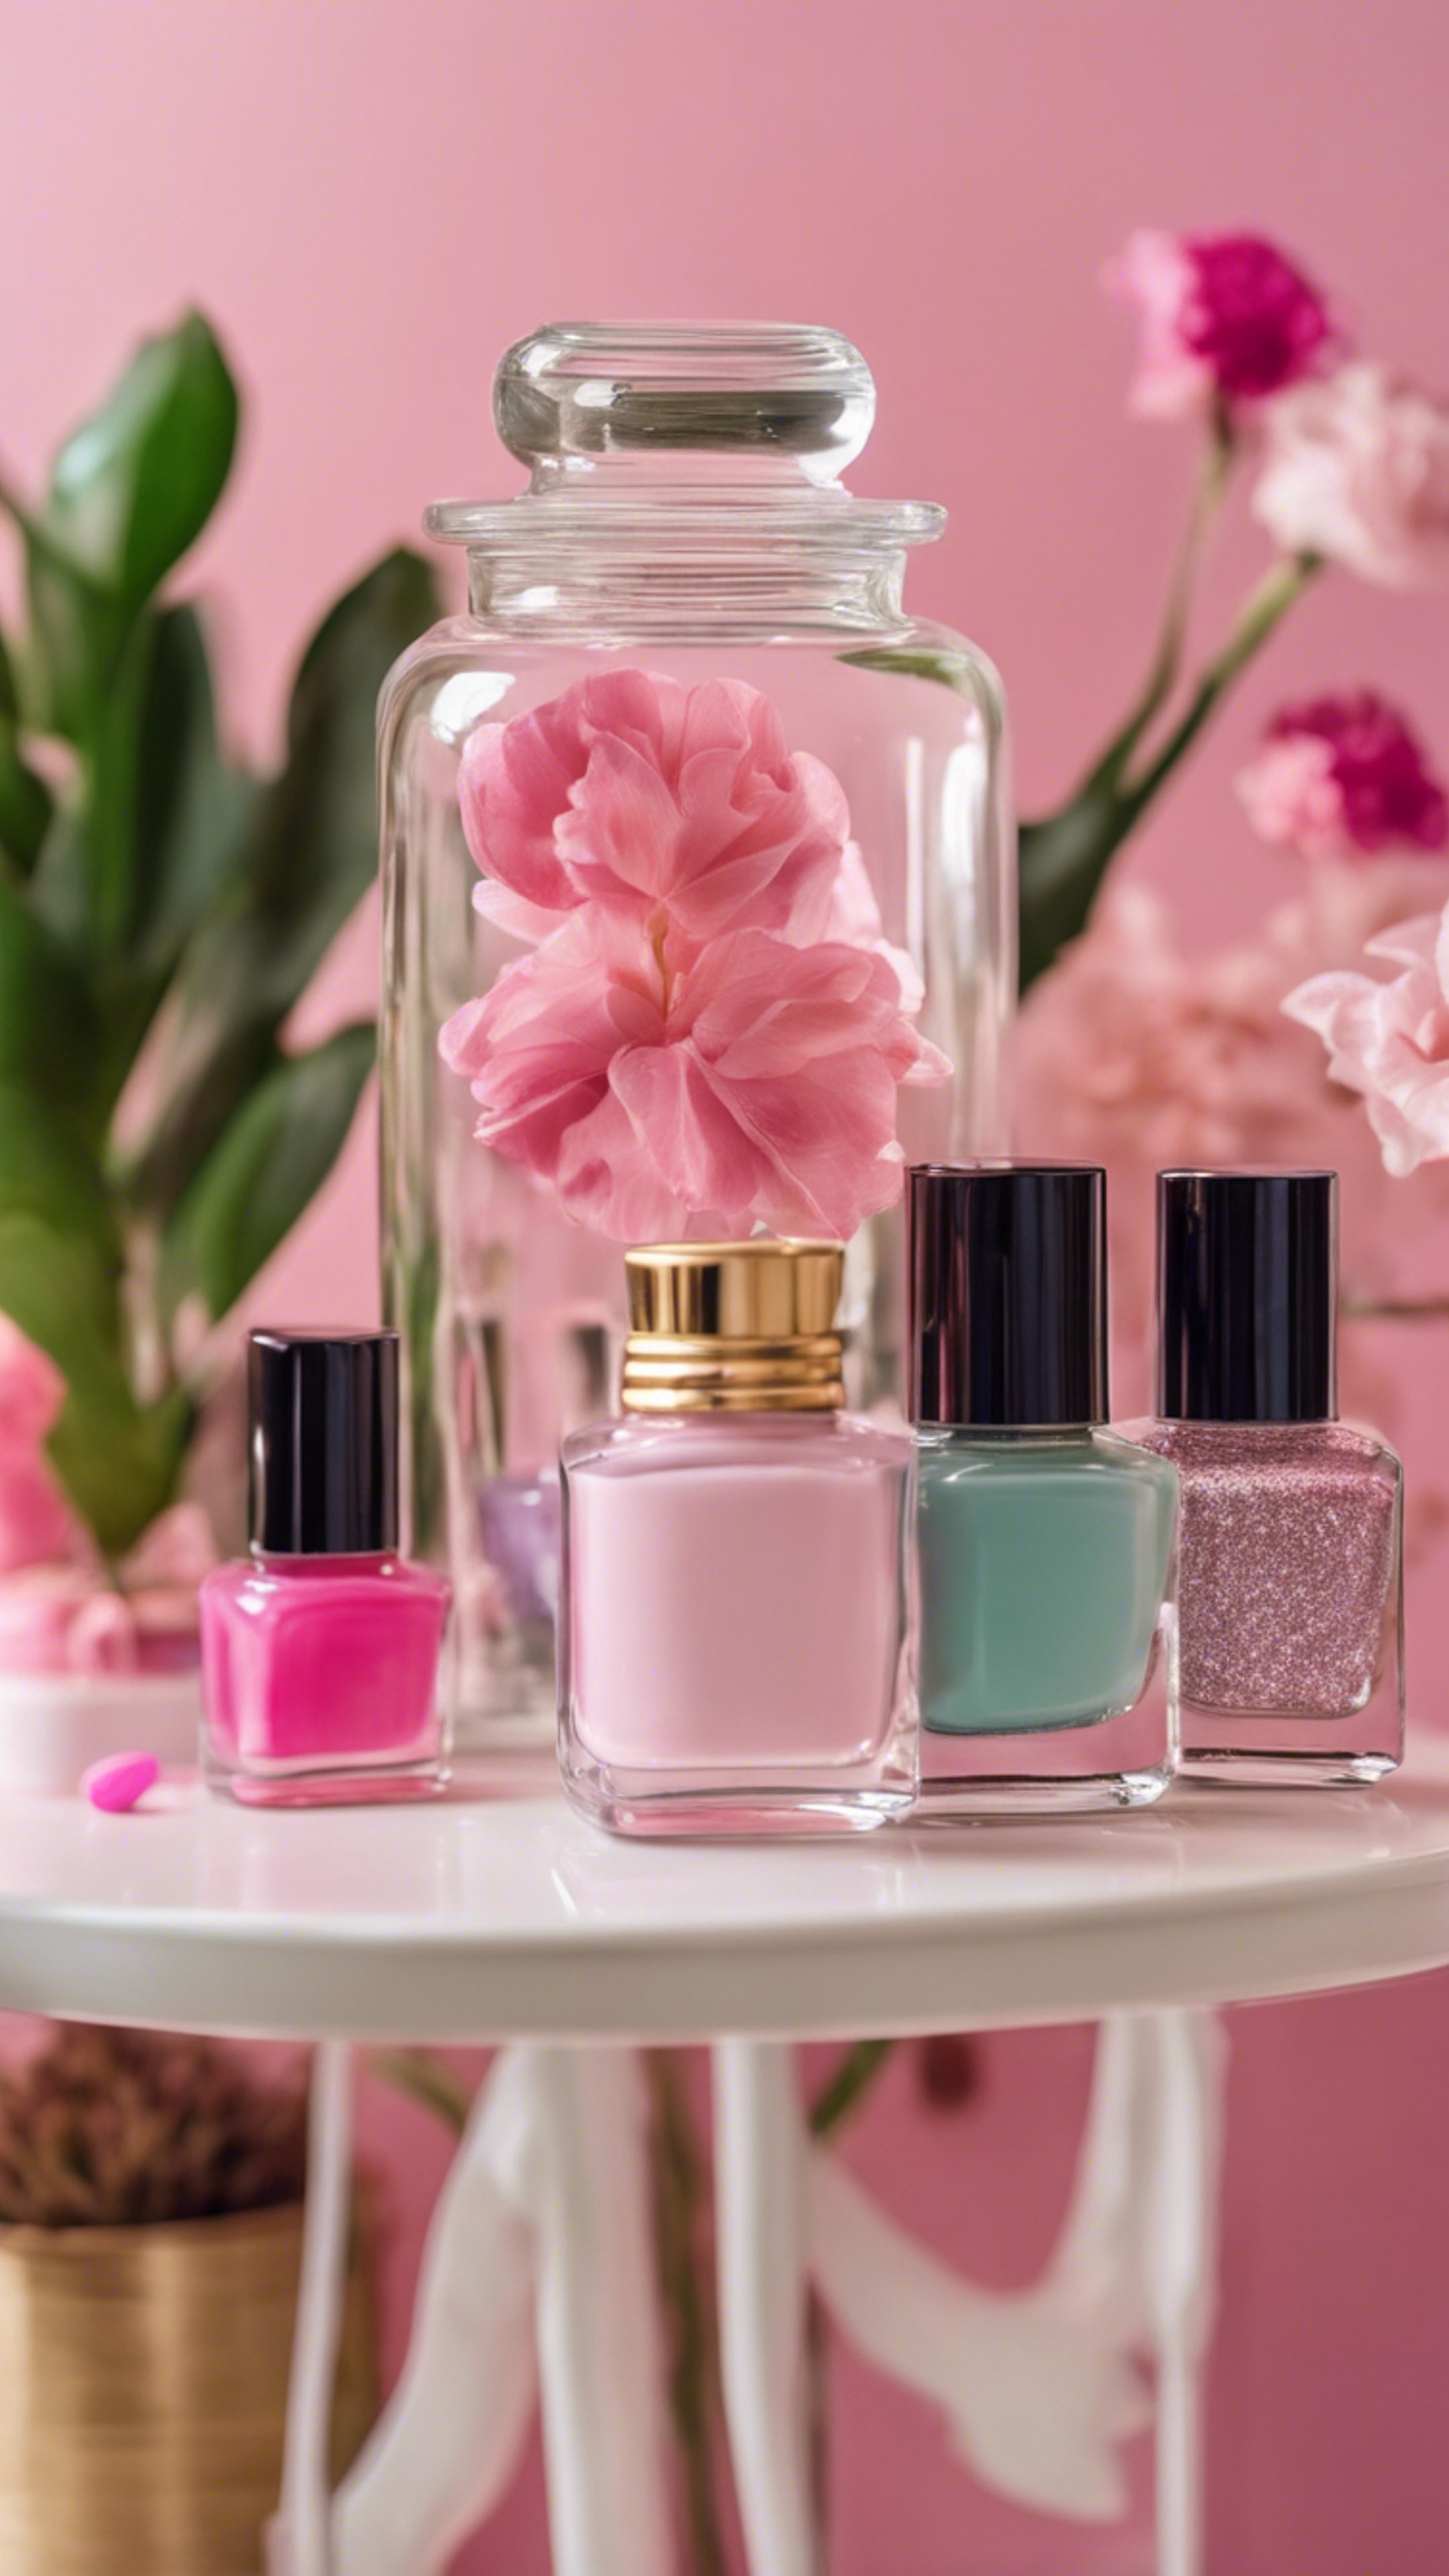 A glass jar full of colorful girly nail polishes on a pink dressing table with a chic plant in the background. Обои[6e6d72fe0d8e4450902a]